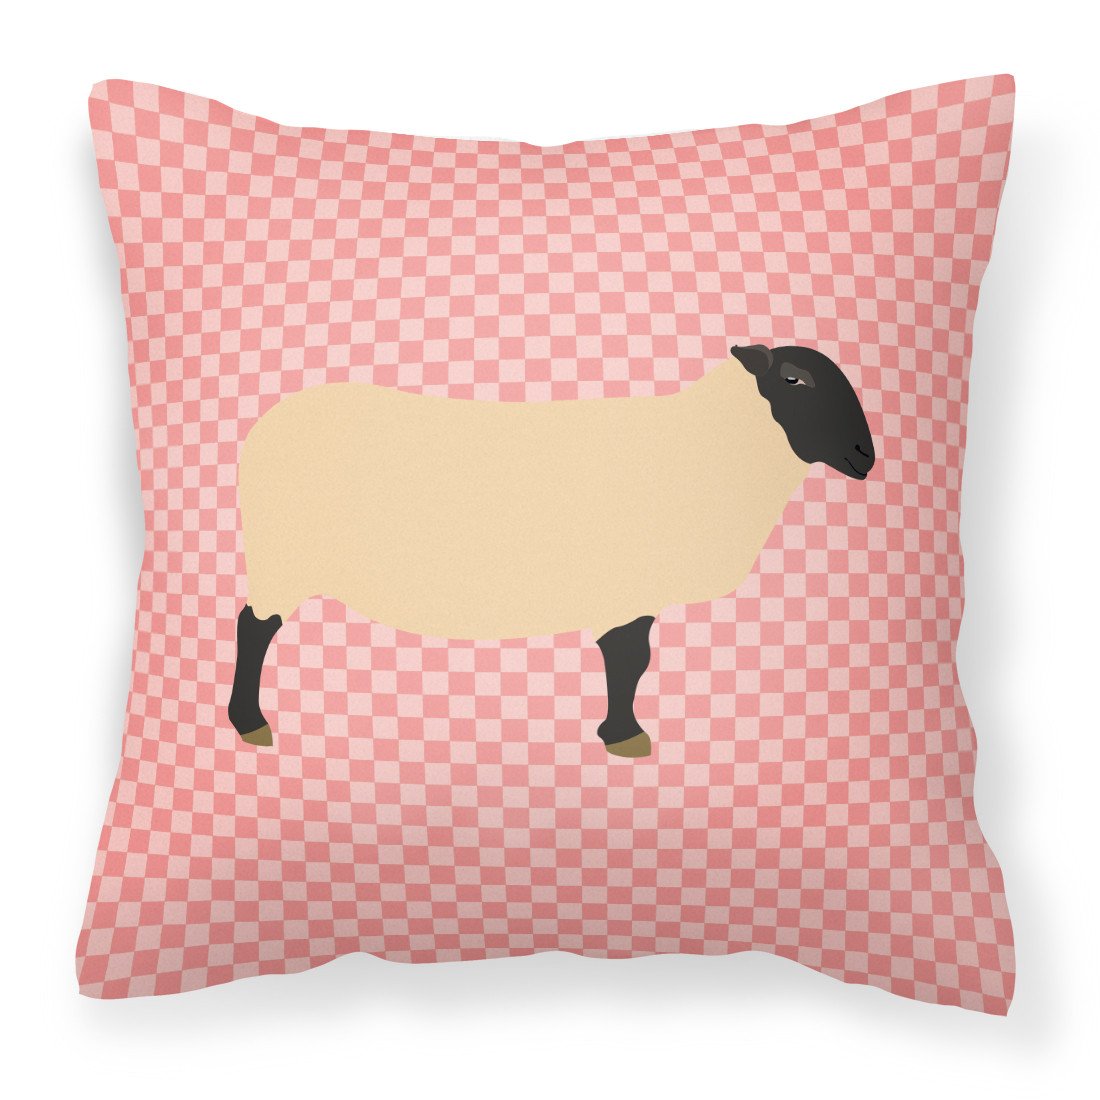 Suffolk Sheep Pink Check Fabric Decorative Pillow BB7972PW1818 by Caroline's Treasures